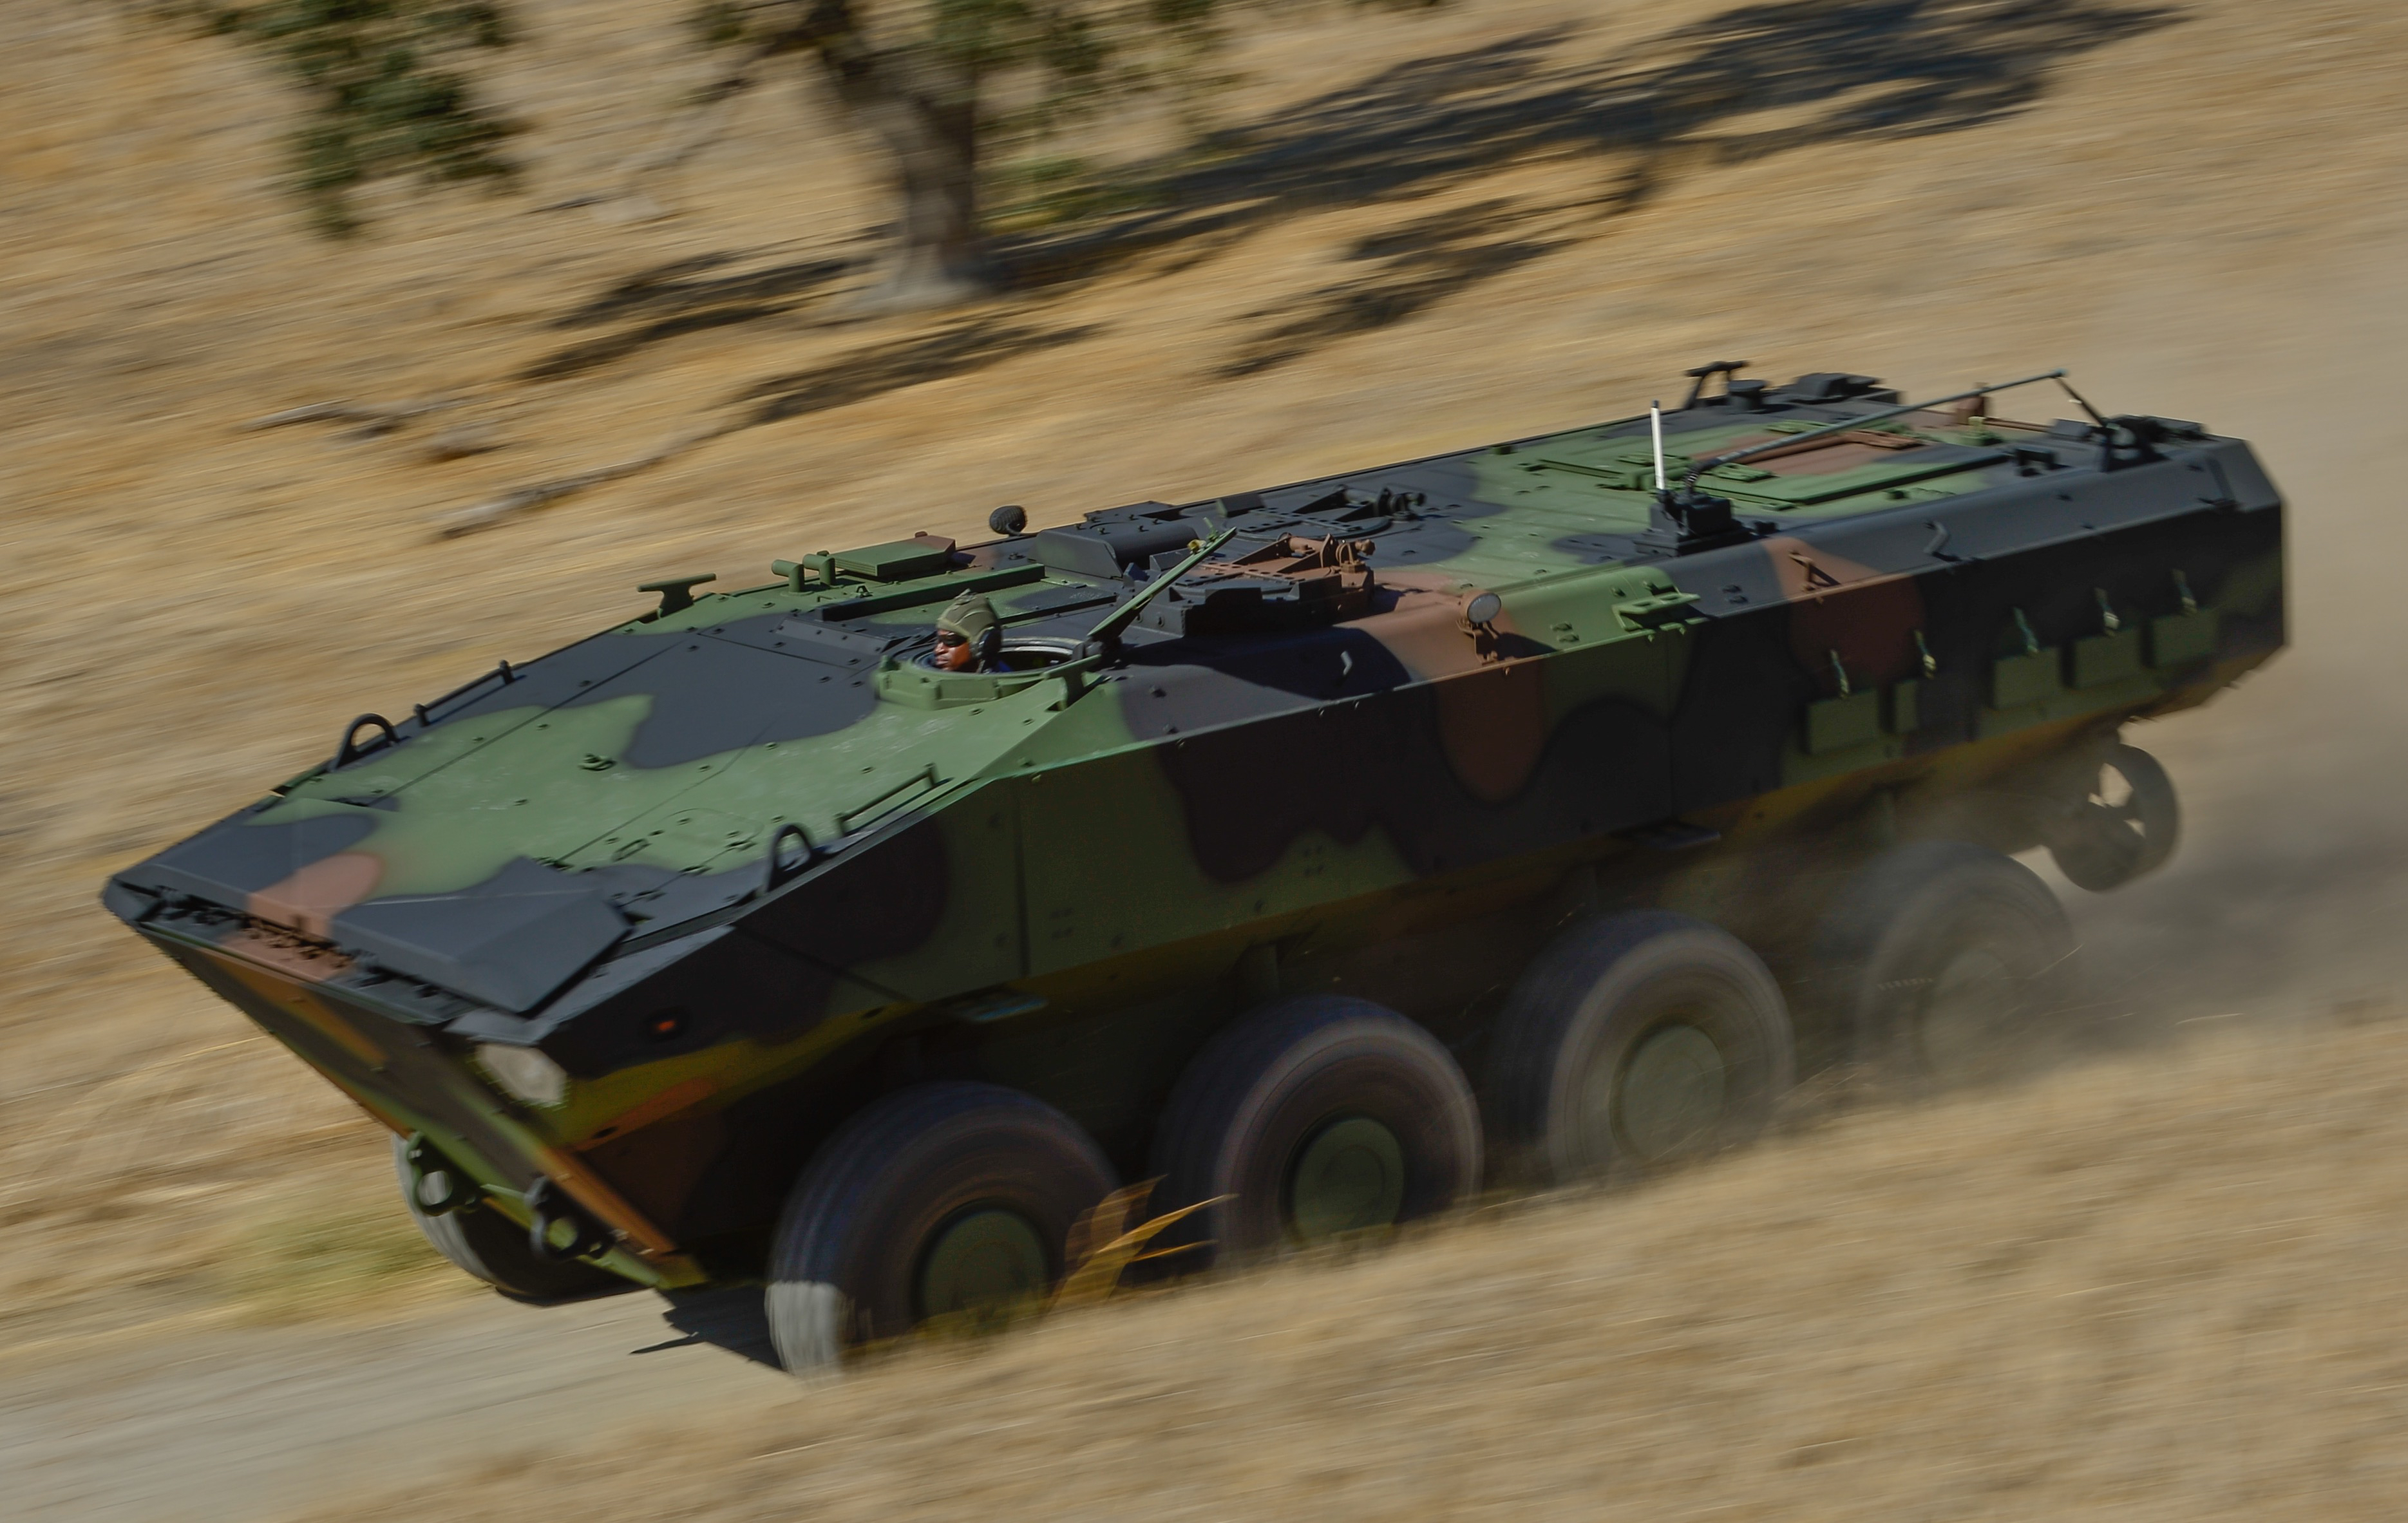 BAE Systems and Iveco Defense partnered to create this entrant for the Marines ACV 1.1 competition. Photo courtesy BAE Systems. 